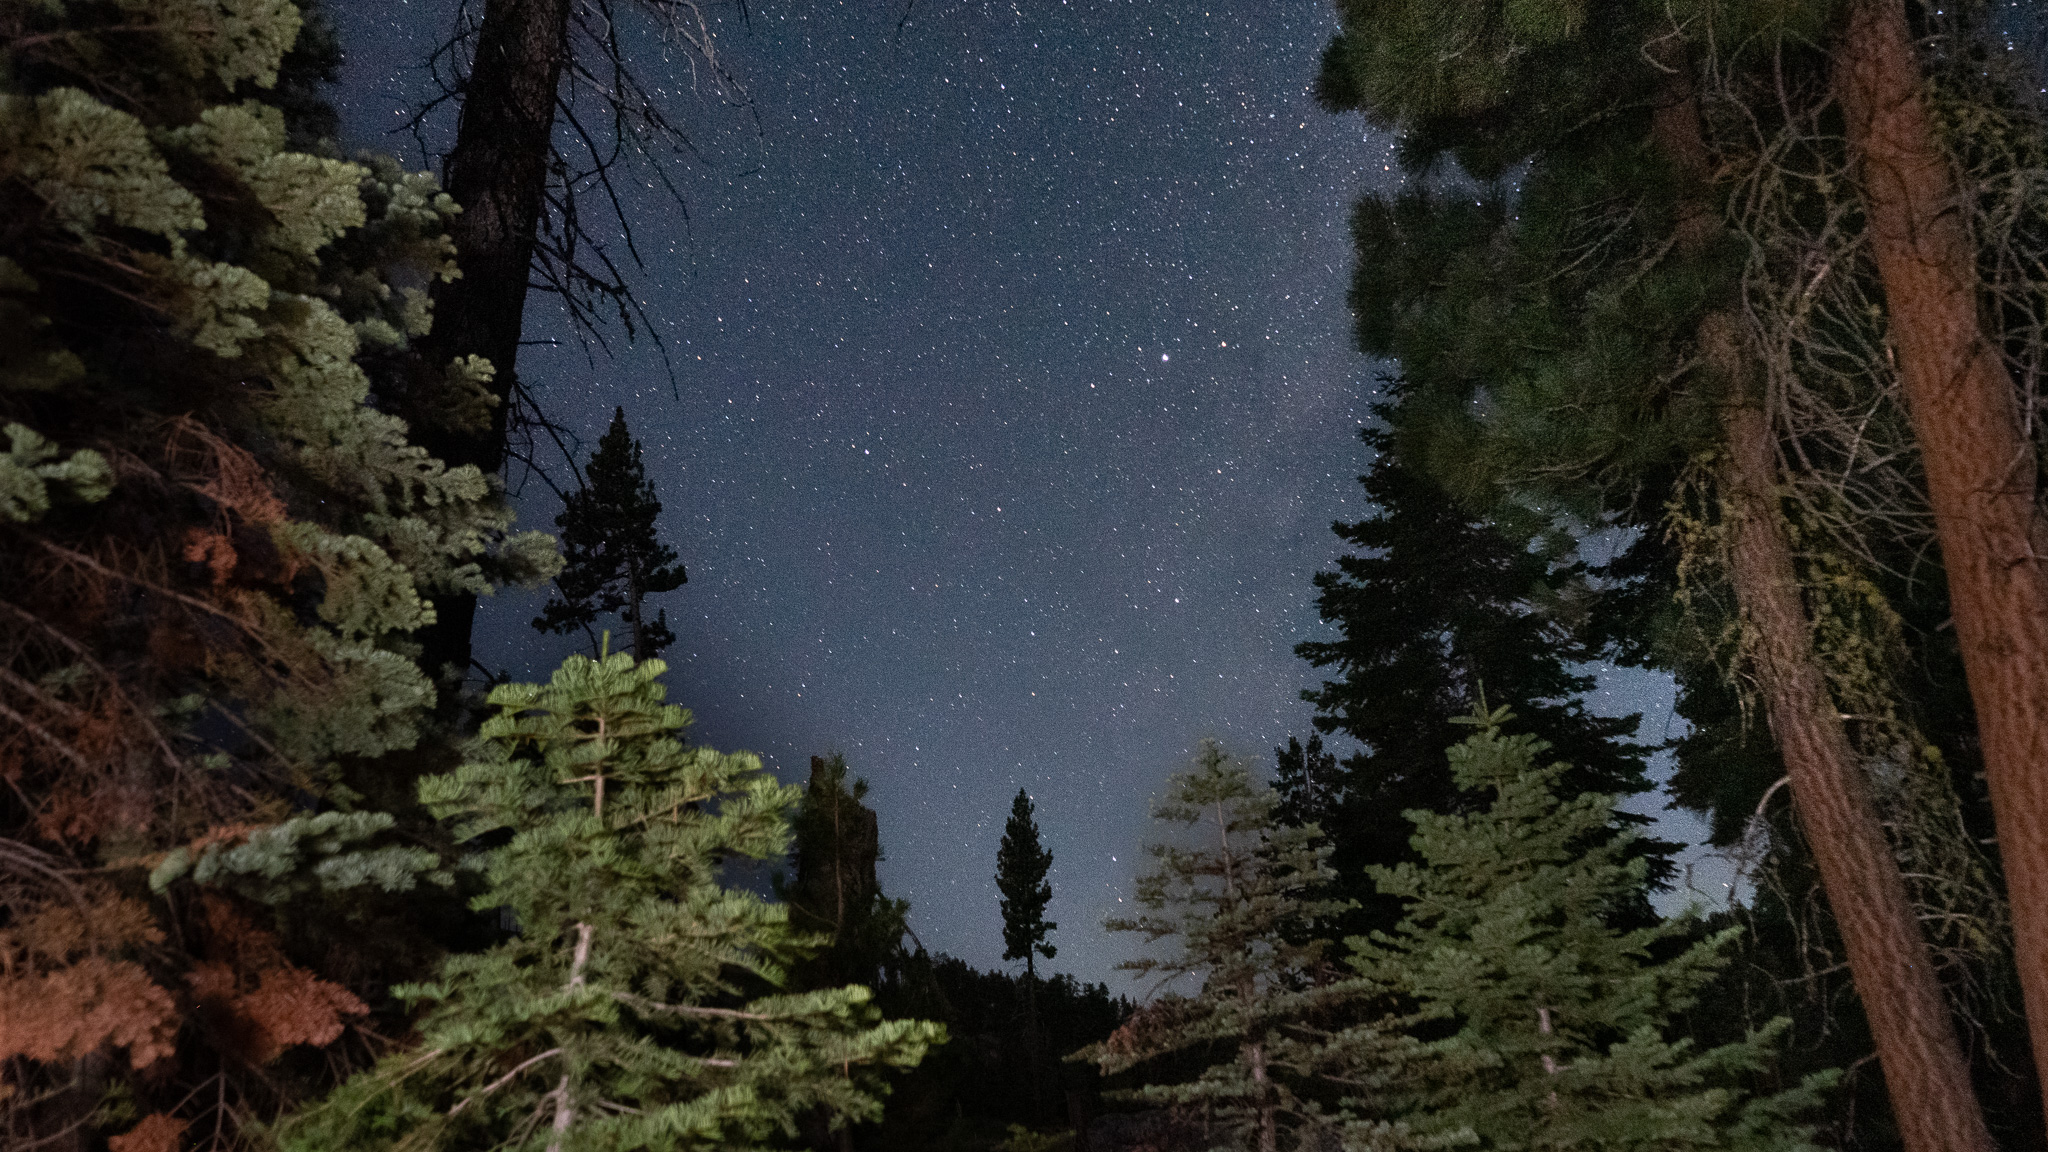 Night sky with trees in the foreground. 